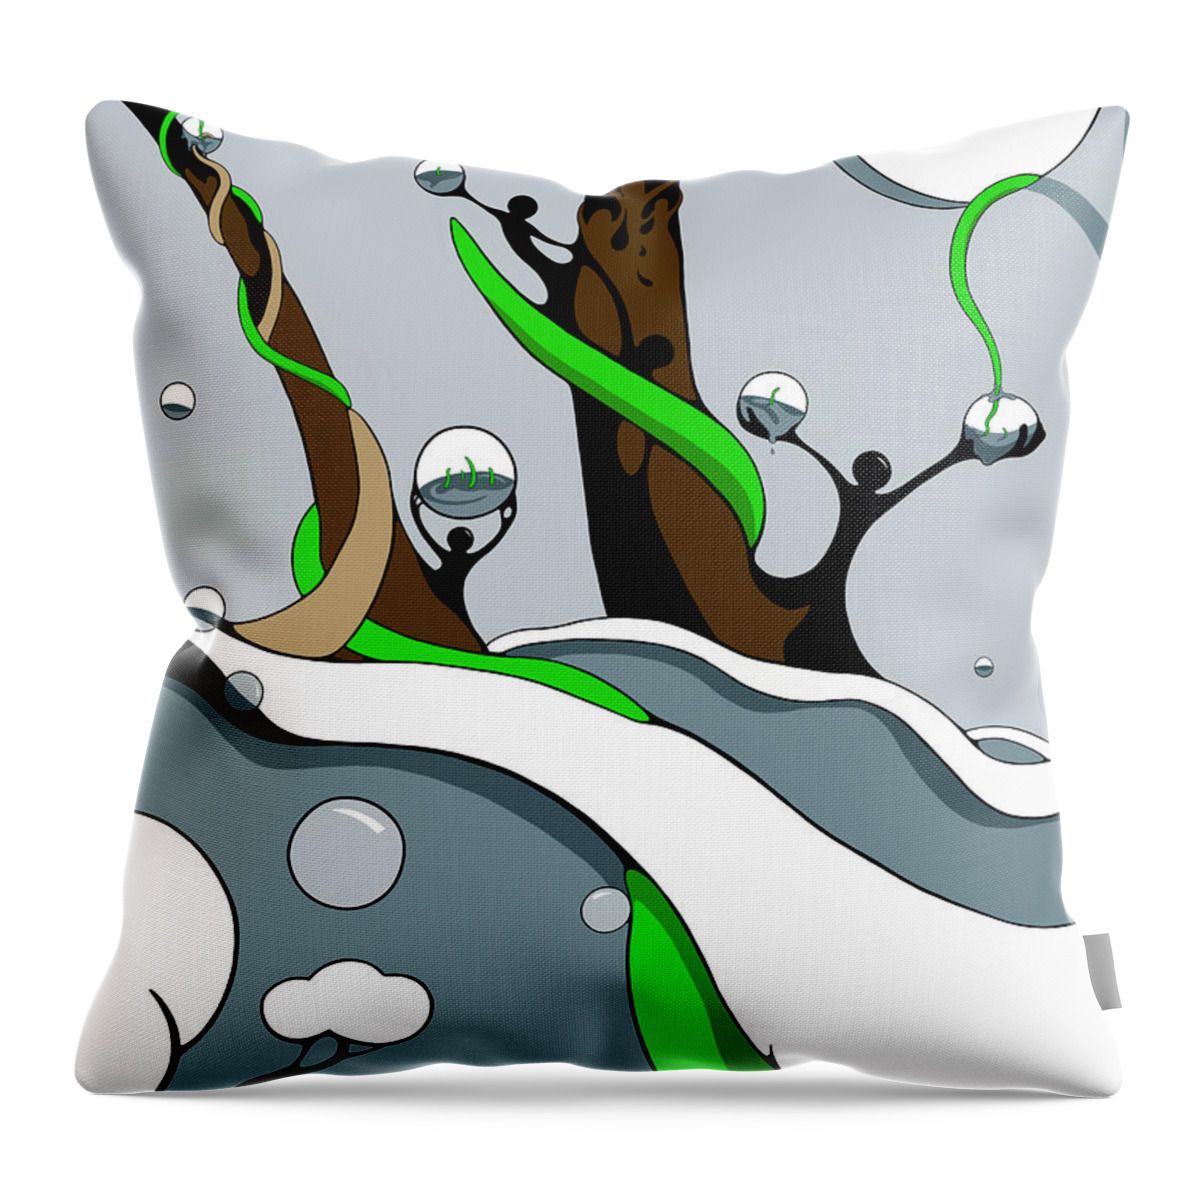 Vines Throw Pillow featuring the drawing Half Full by Craig Tilley